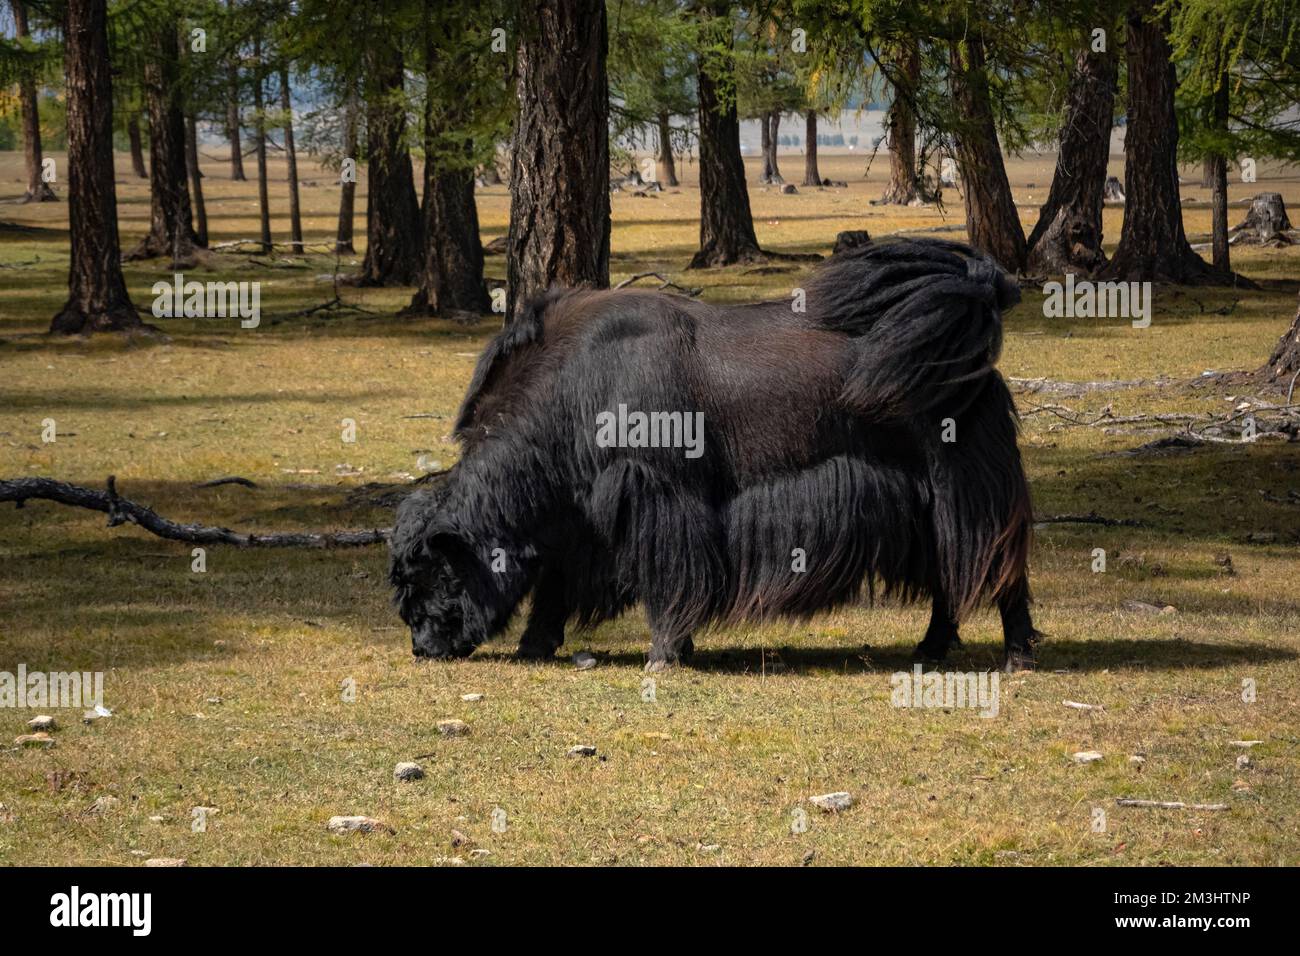 Yak standing in a field in rural Mongolia. Longhair buffalo in a countryside on a sunny day. Stock Photo